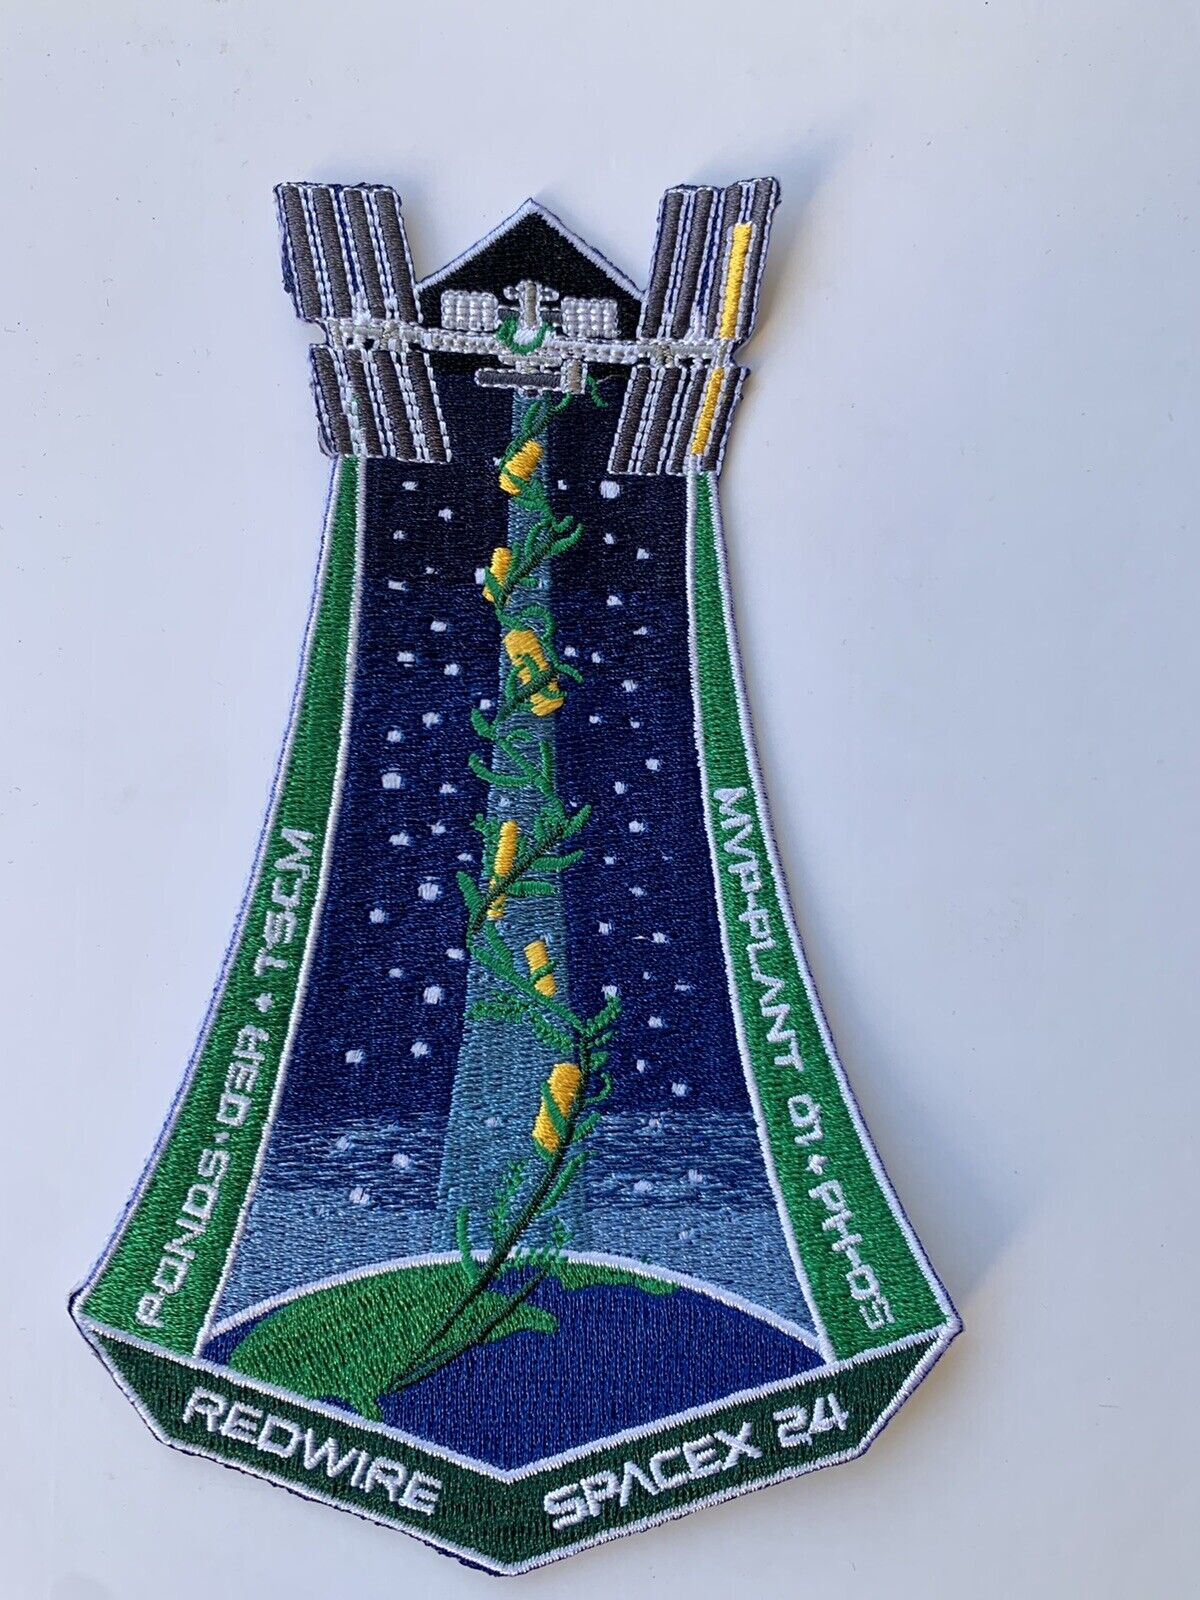 Original SPACEX CRS-24 NASA COMMERCIAL ISS RESUPPLY MISSION PATCH SOLAR PANELS